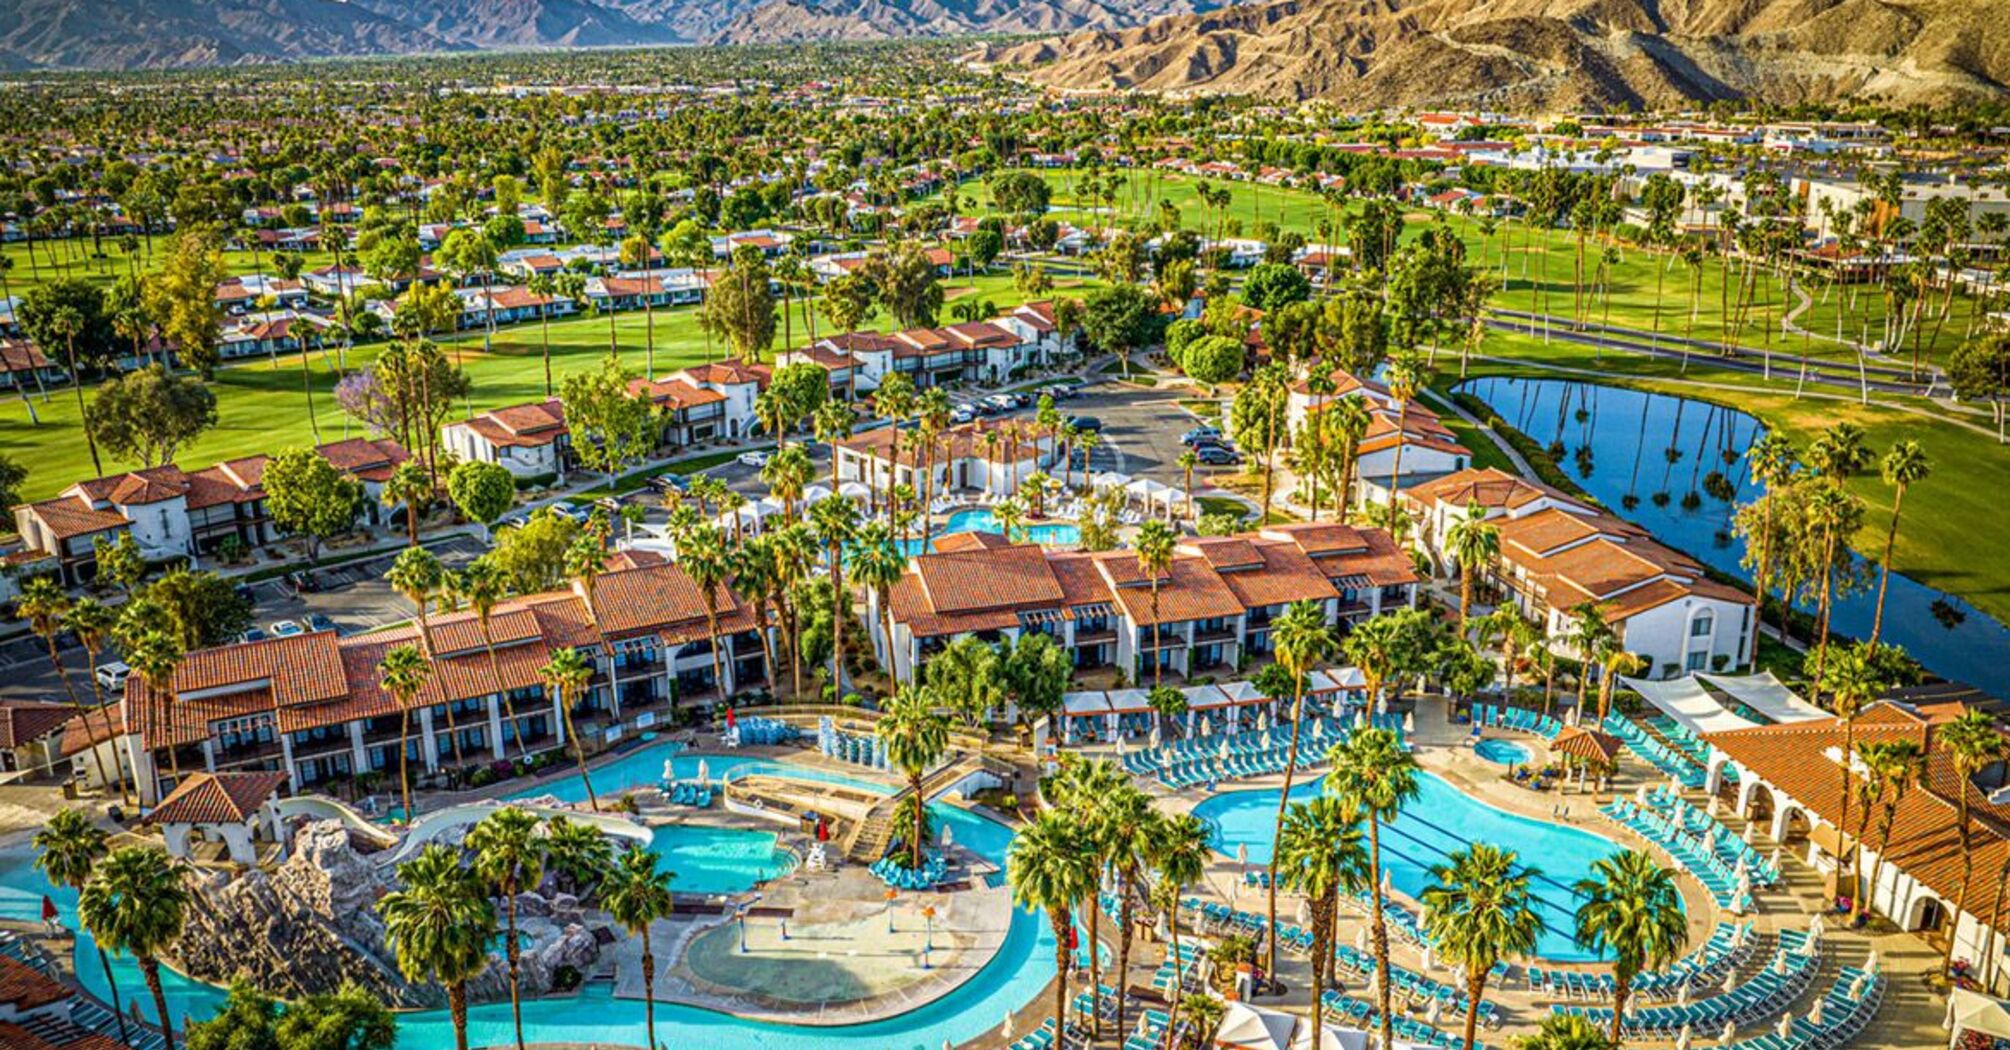 Best lazy river resorts in the US: 7 most exciting streams for your next summer vacation